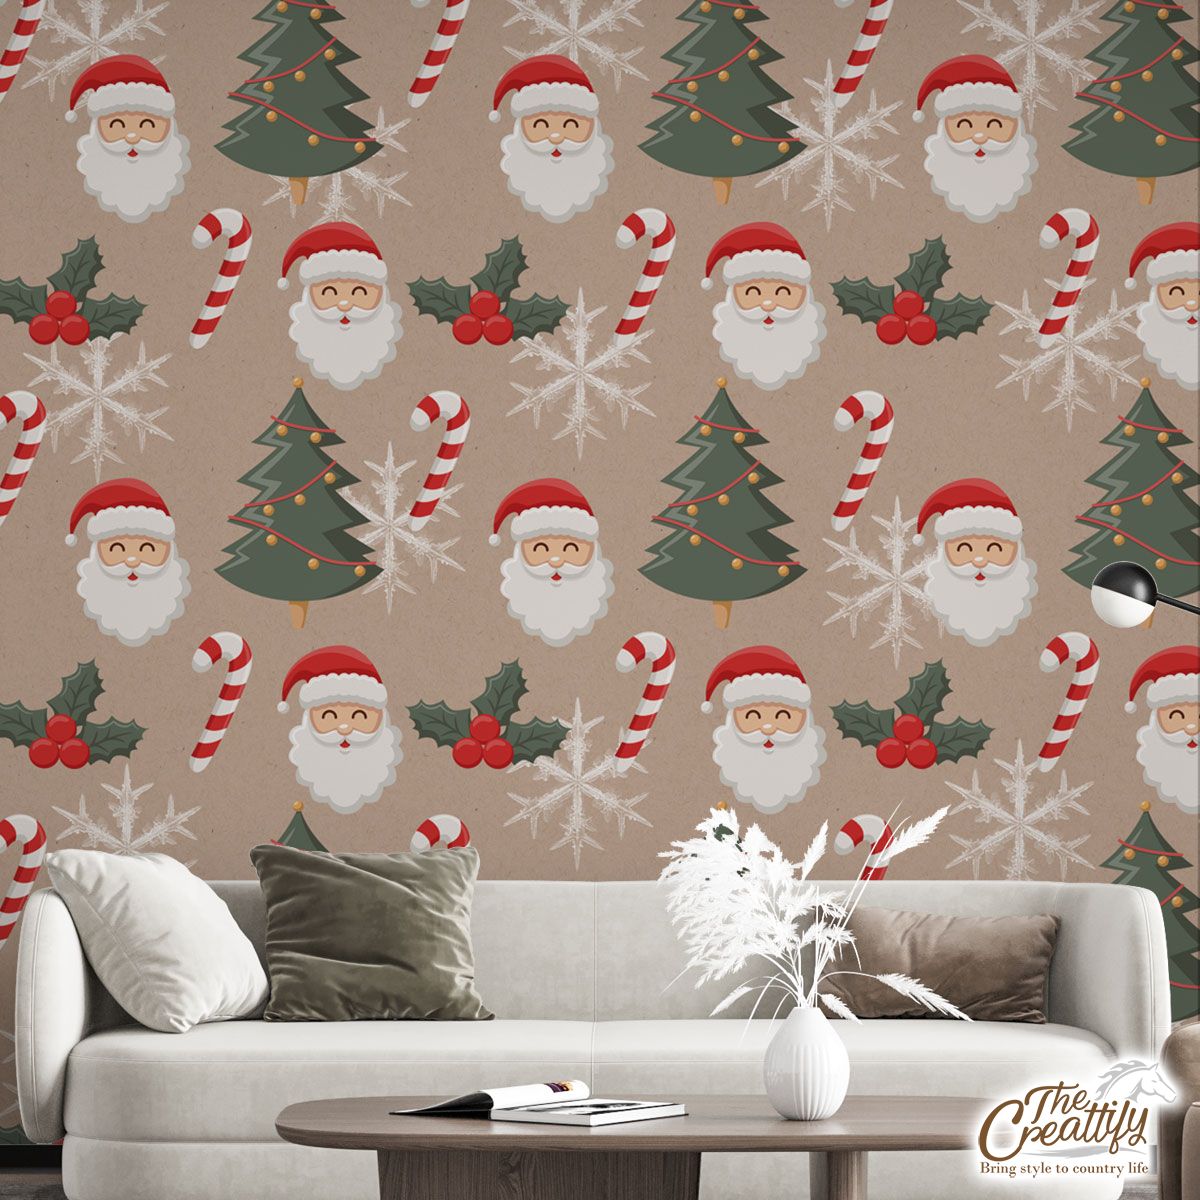 Santa Clause, Christmas Tree, Candy Cane, Holly Leaf On Snowflake Background Wall Mural